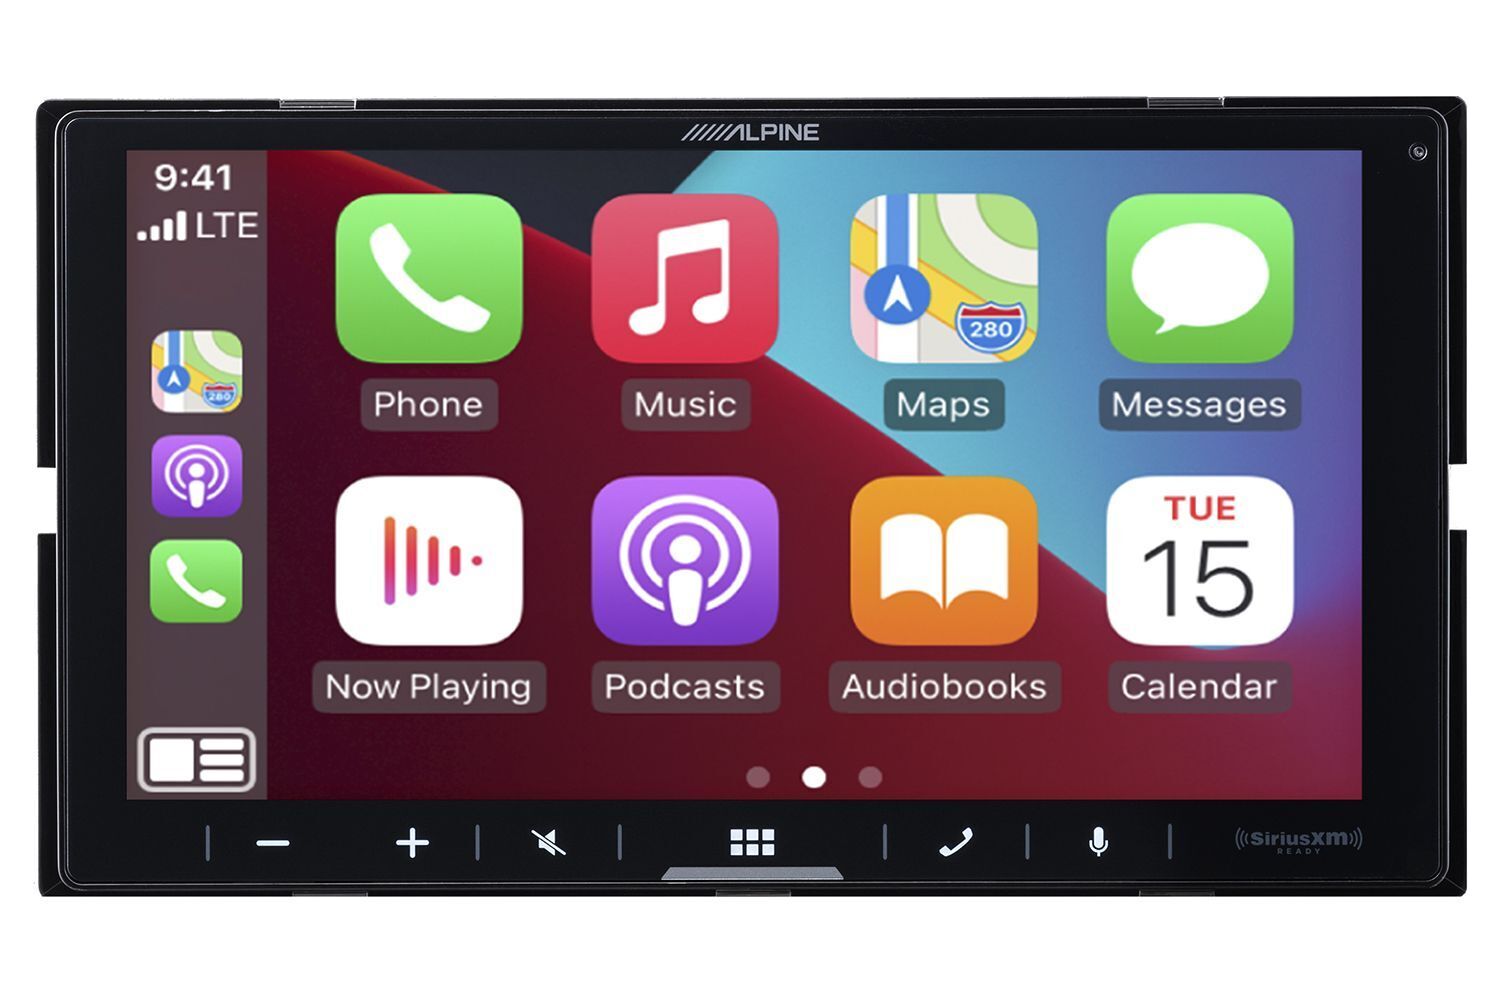 Alpine iLX-W670 Receiver with Apple CarPlay and Android Auto Includes KTA-450 4-Channel Power Pack Amplifier